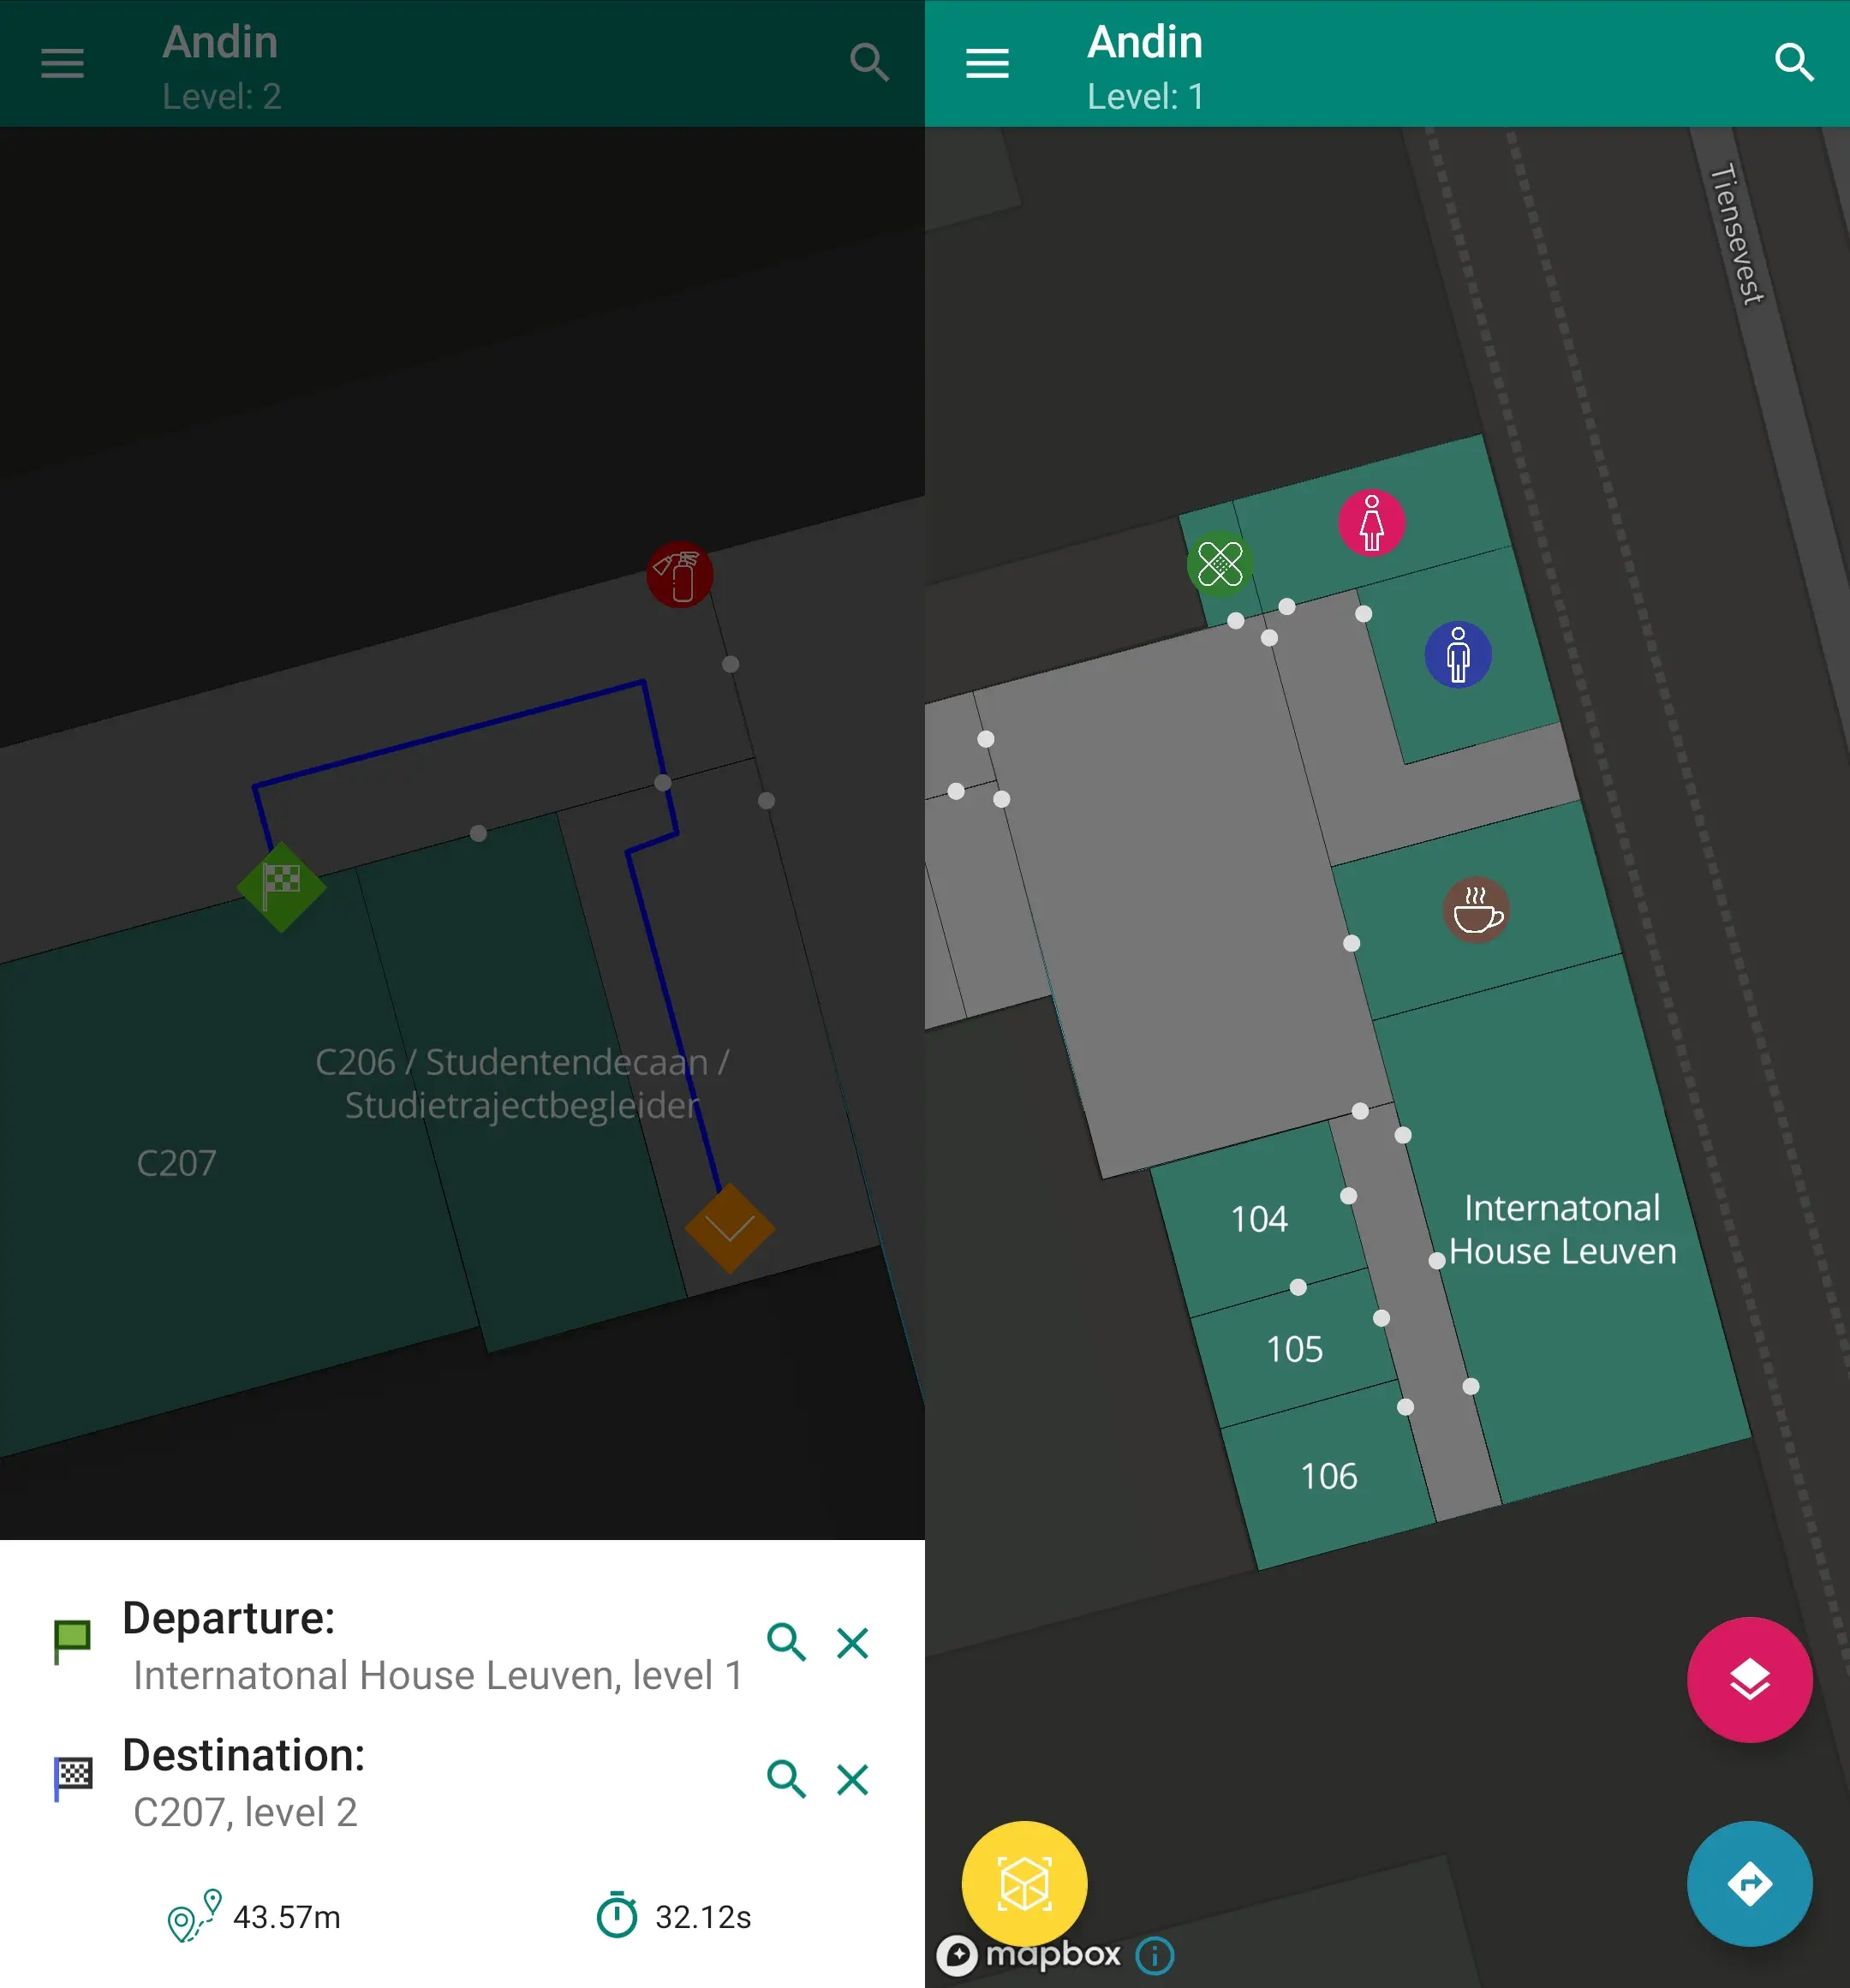 Two screenshots of the Andin android application, showing a map of rooms in a building